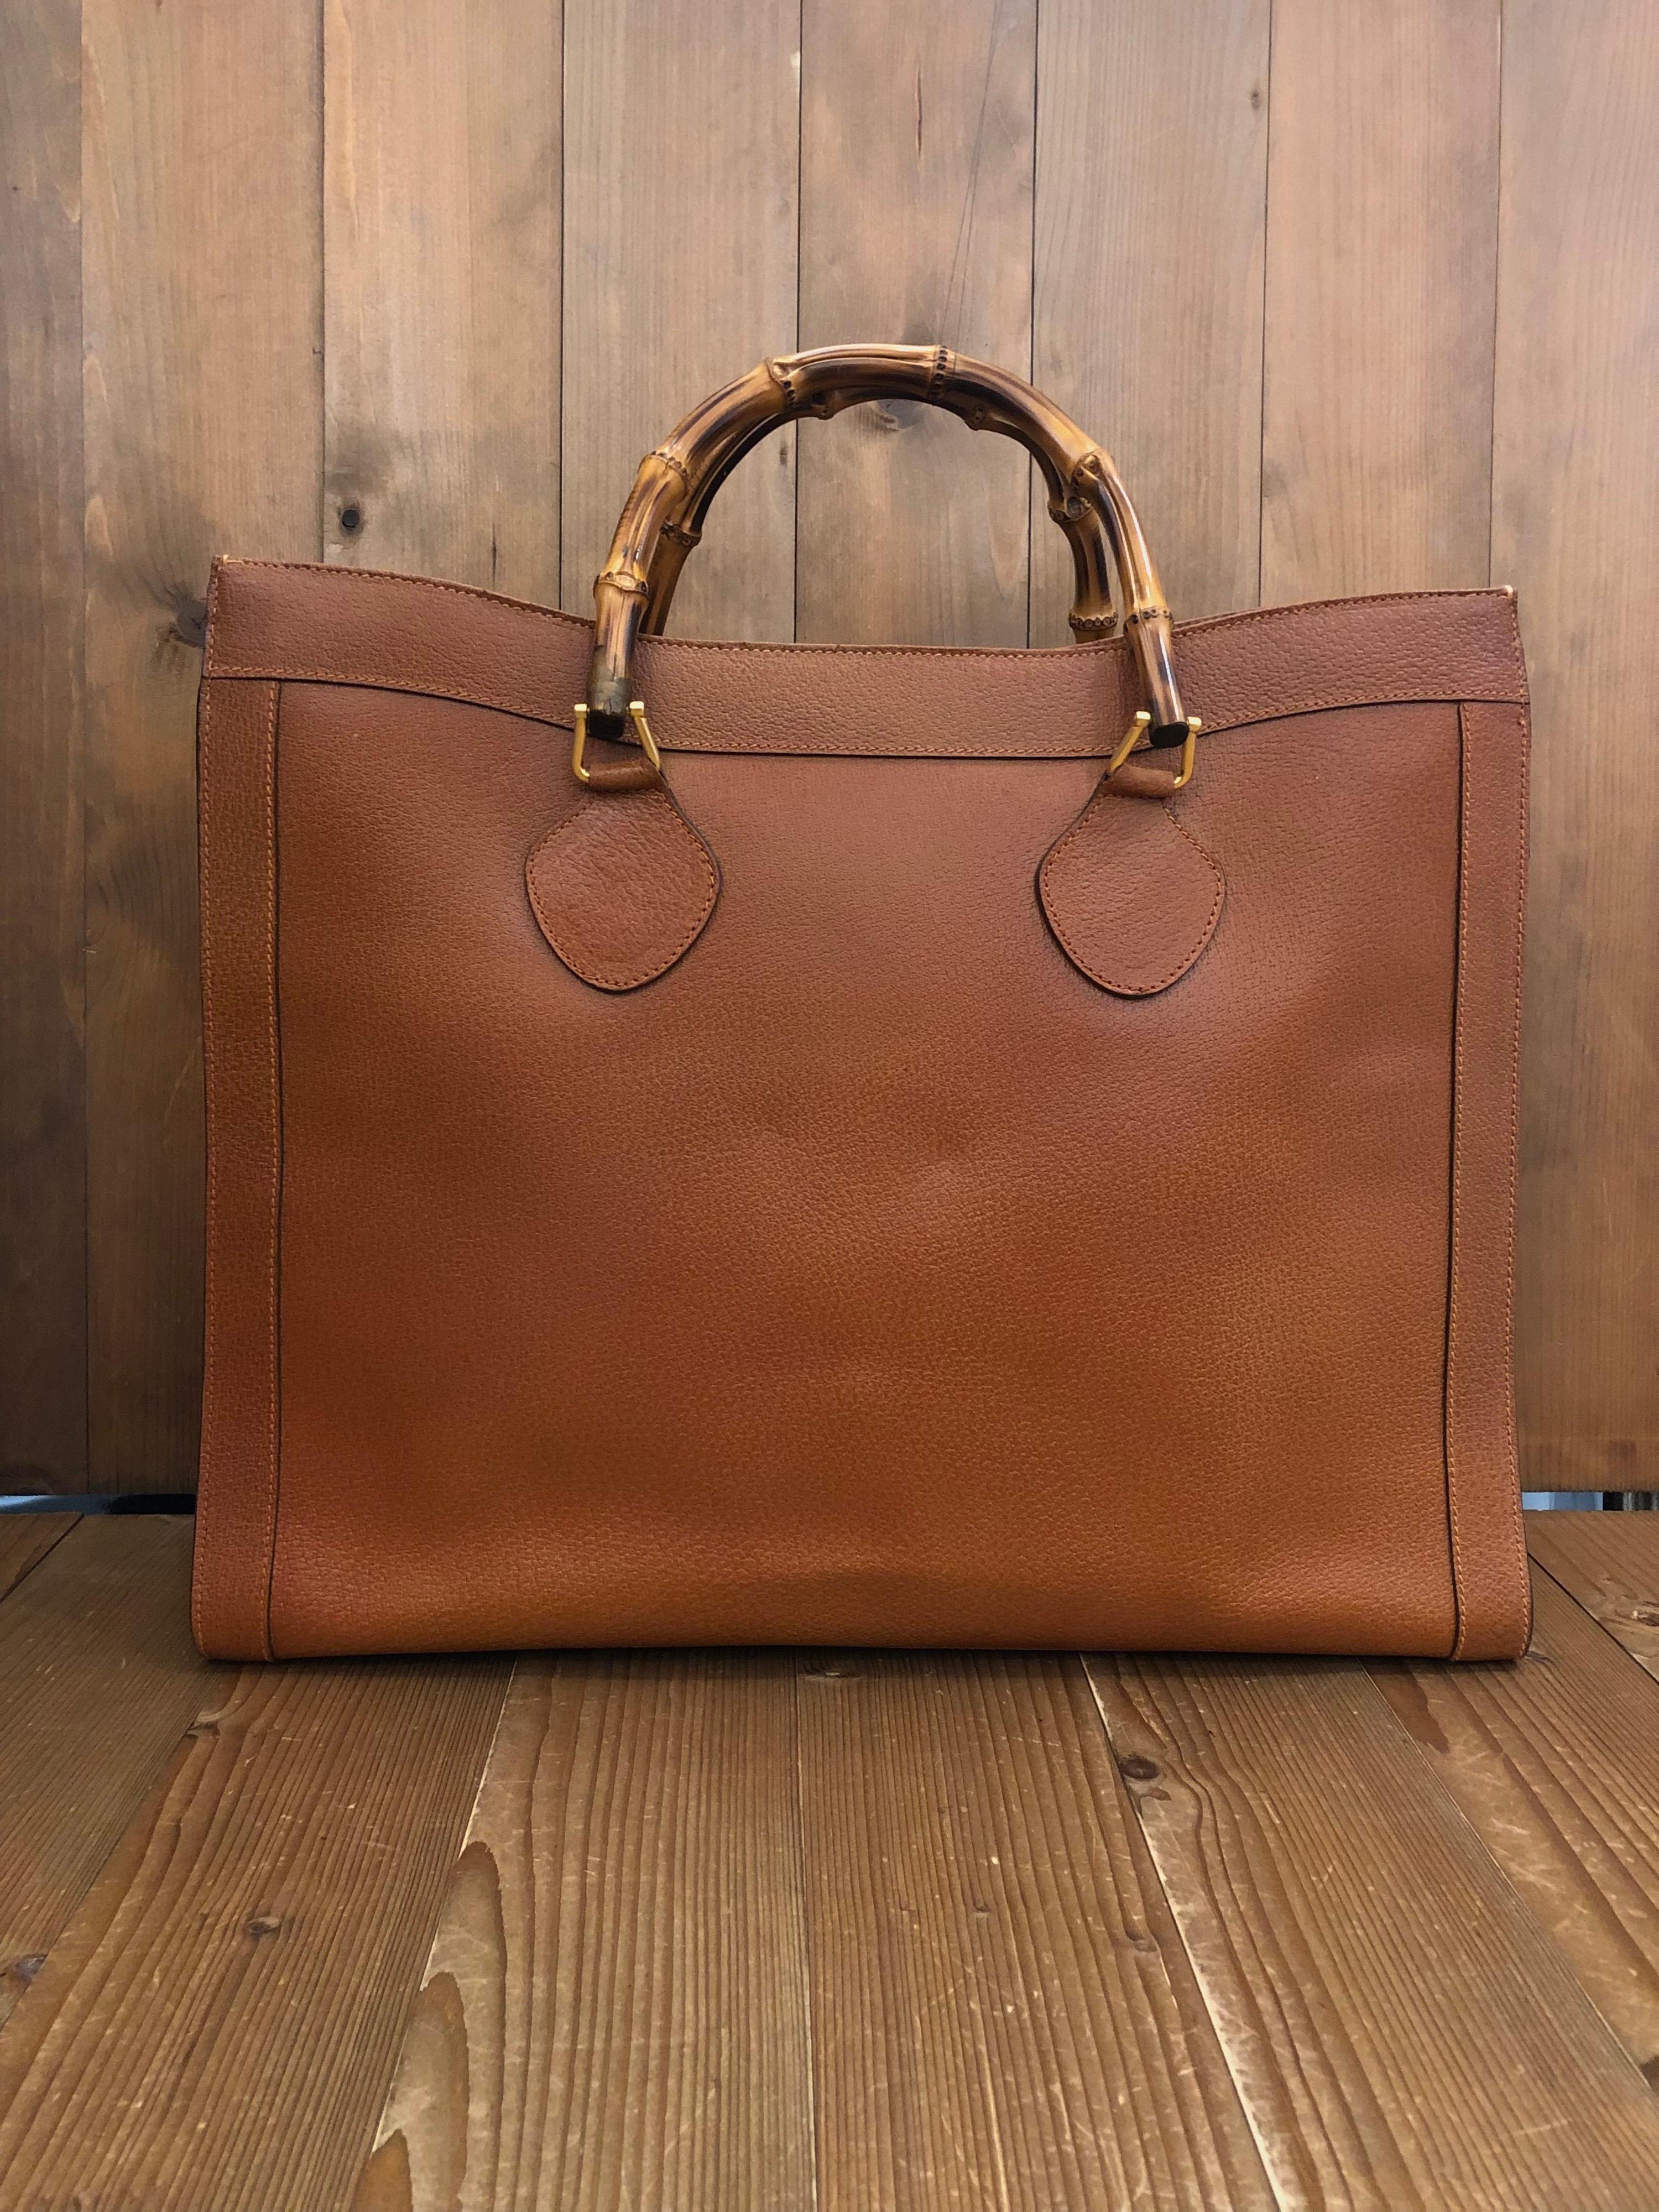 1990s Gucci bamboo tote in brown leather. The Bamboo tote is one of Princess Diana's favorite purses. Gucci revamped this Bamboo tote in 2021 winter collection. Made in Italy. Measures 16.75 x 14 x 5.5 inches handle drop 4.5 inches featuring two